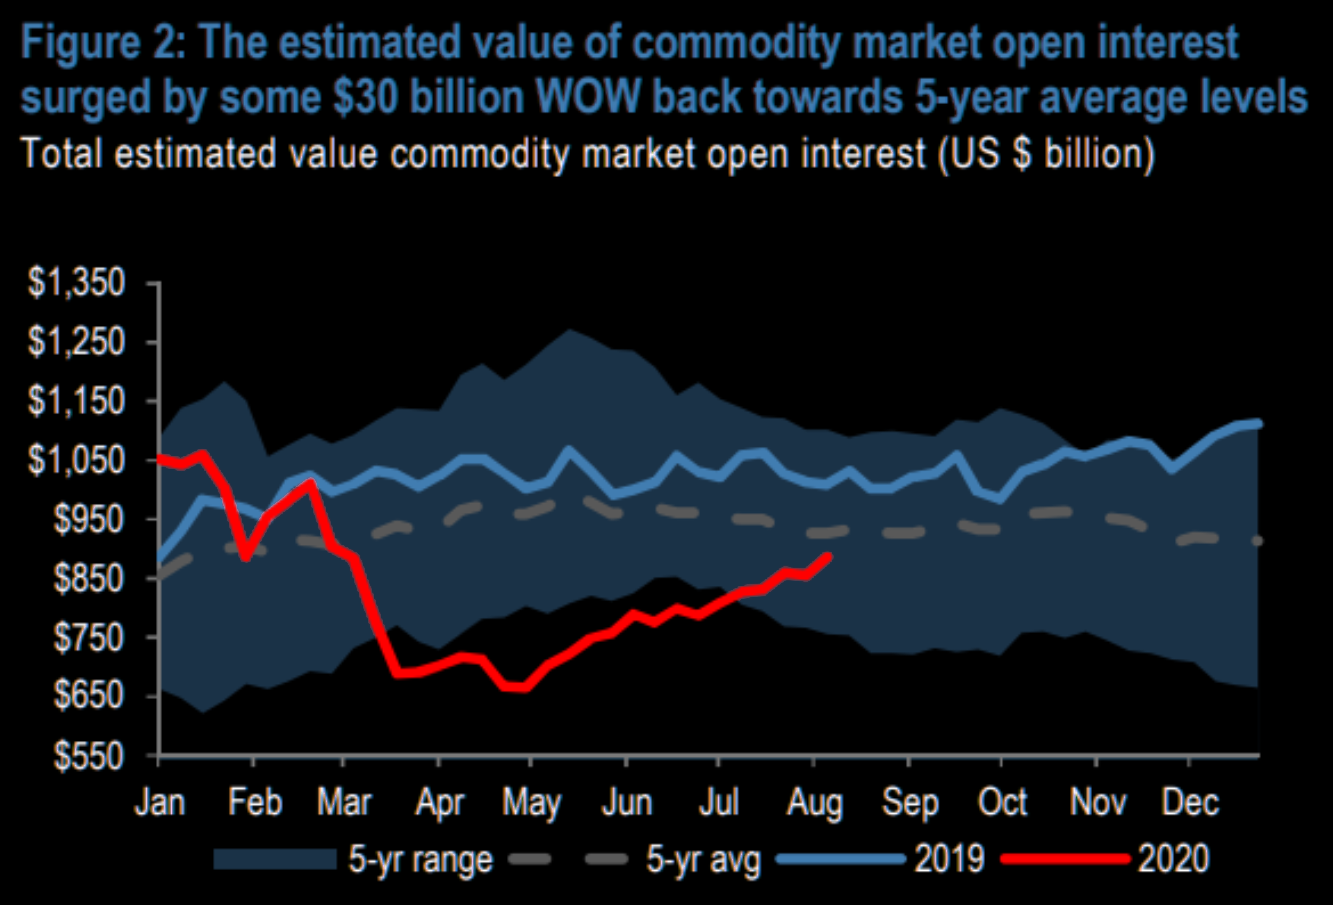 Commodity open interest is back to pre-COVID levels 